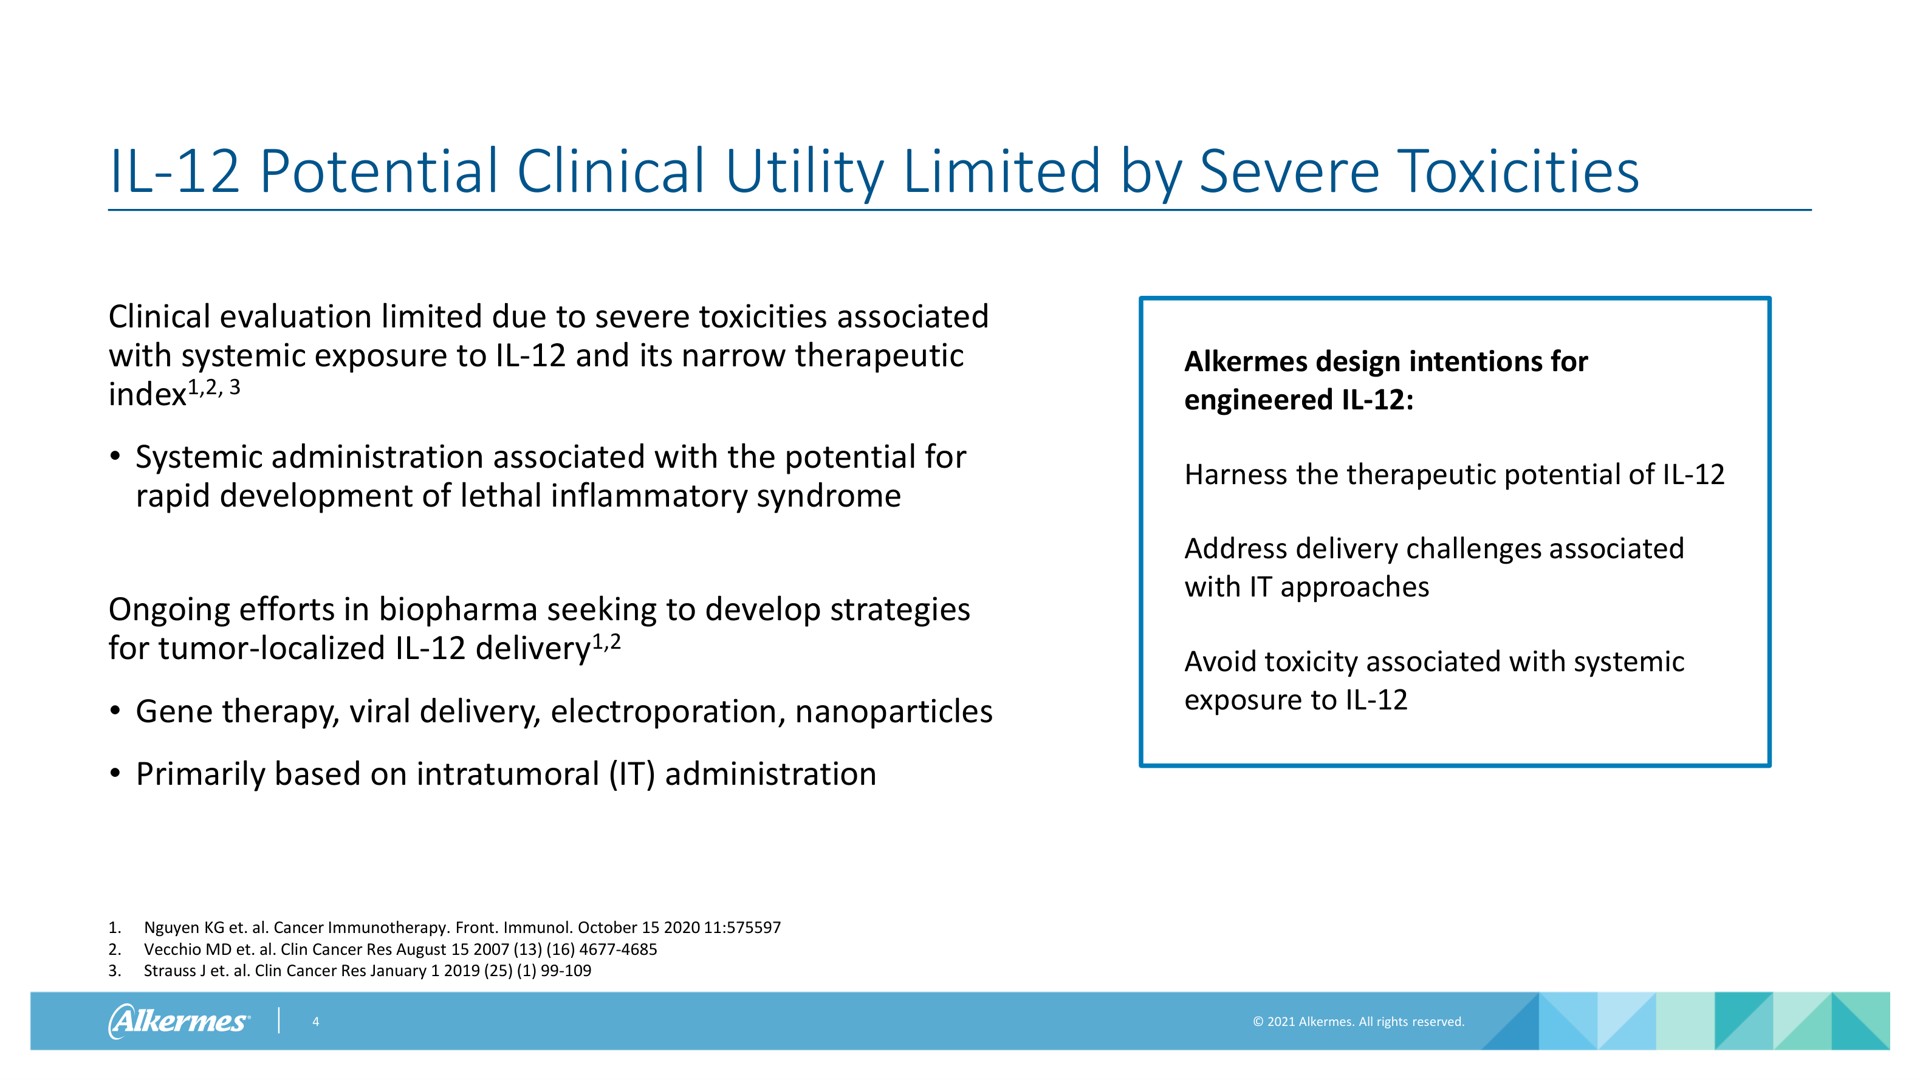 potential clinical utility limited by severe toxicities clinical evaluation limited due to severe toxicities associated with systemic exposure to and its narrow therapeutic index systemic administration associated with the potential for rapid development of lethal inflammatory syndrome ongoing efforts in seeking to develop strategies for tumor localized delivery gene therapy viral delivery primarily based on it administration alkermes design intentions for engineered harness the therapeutic potential of address delivery challenges associated with it approaches avoid toxicity associated with systemic exposure to cancer front cancer res august cancer res index | Alkermes